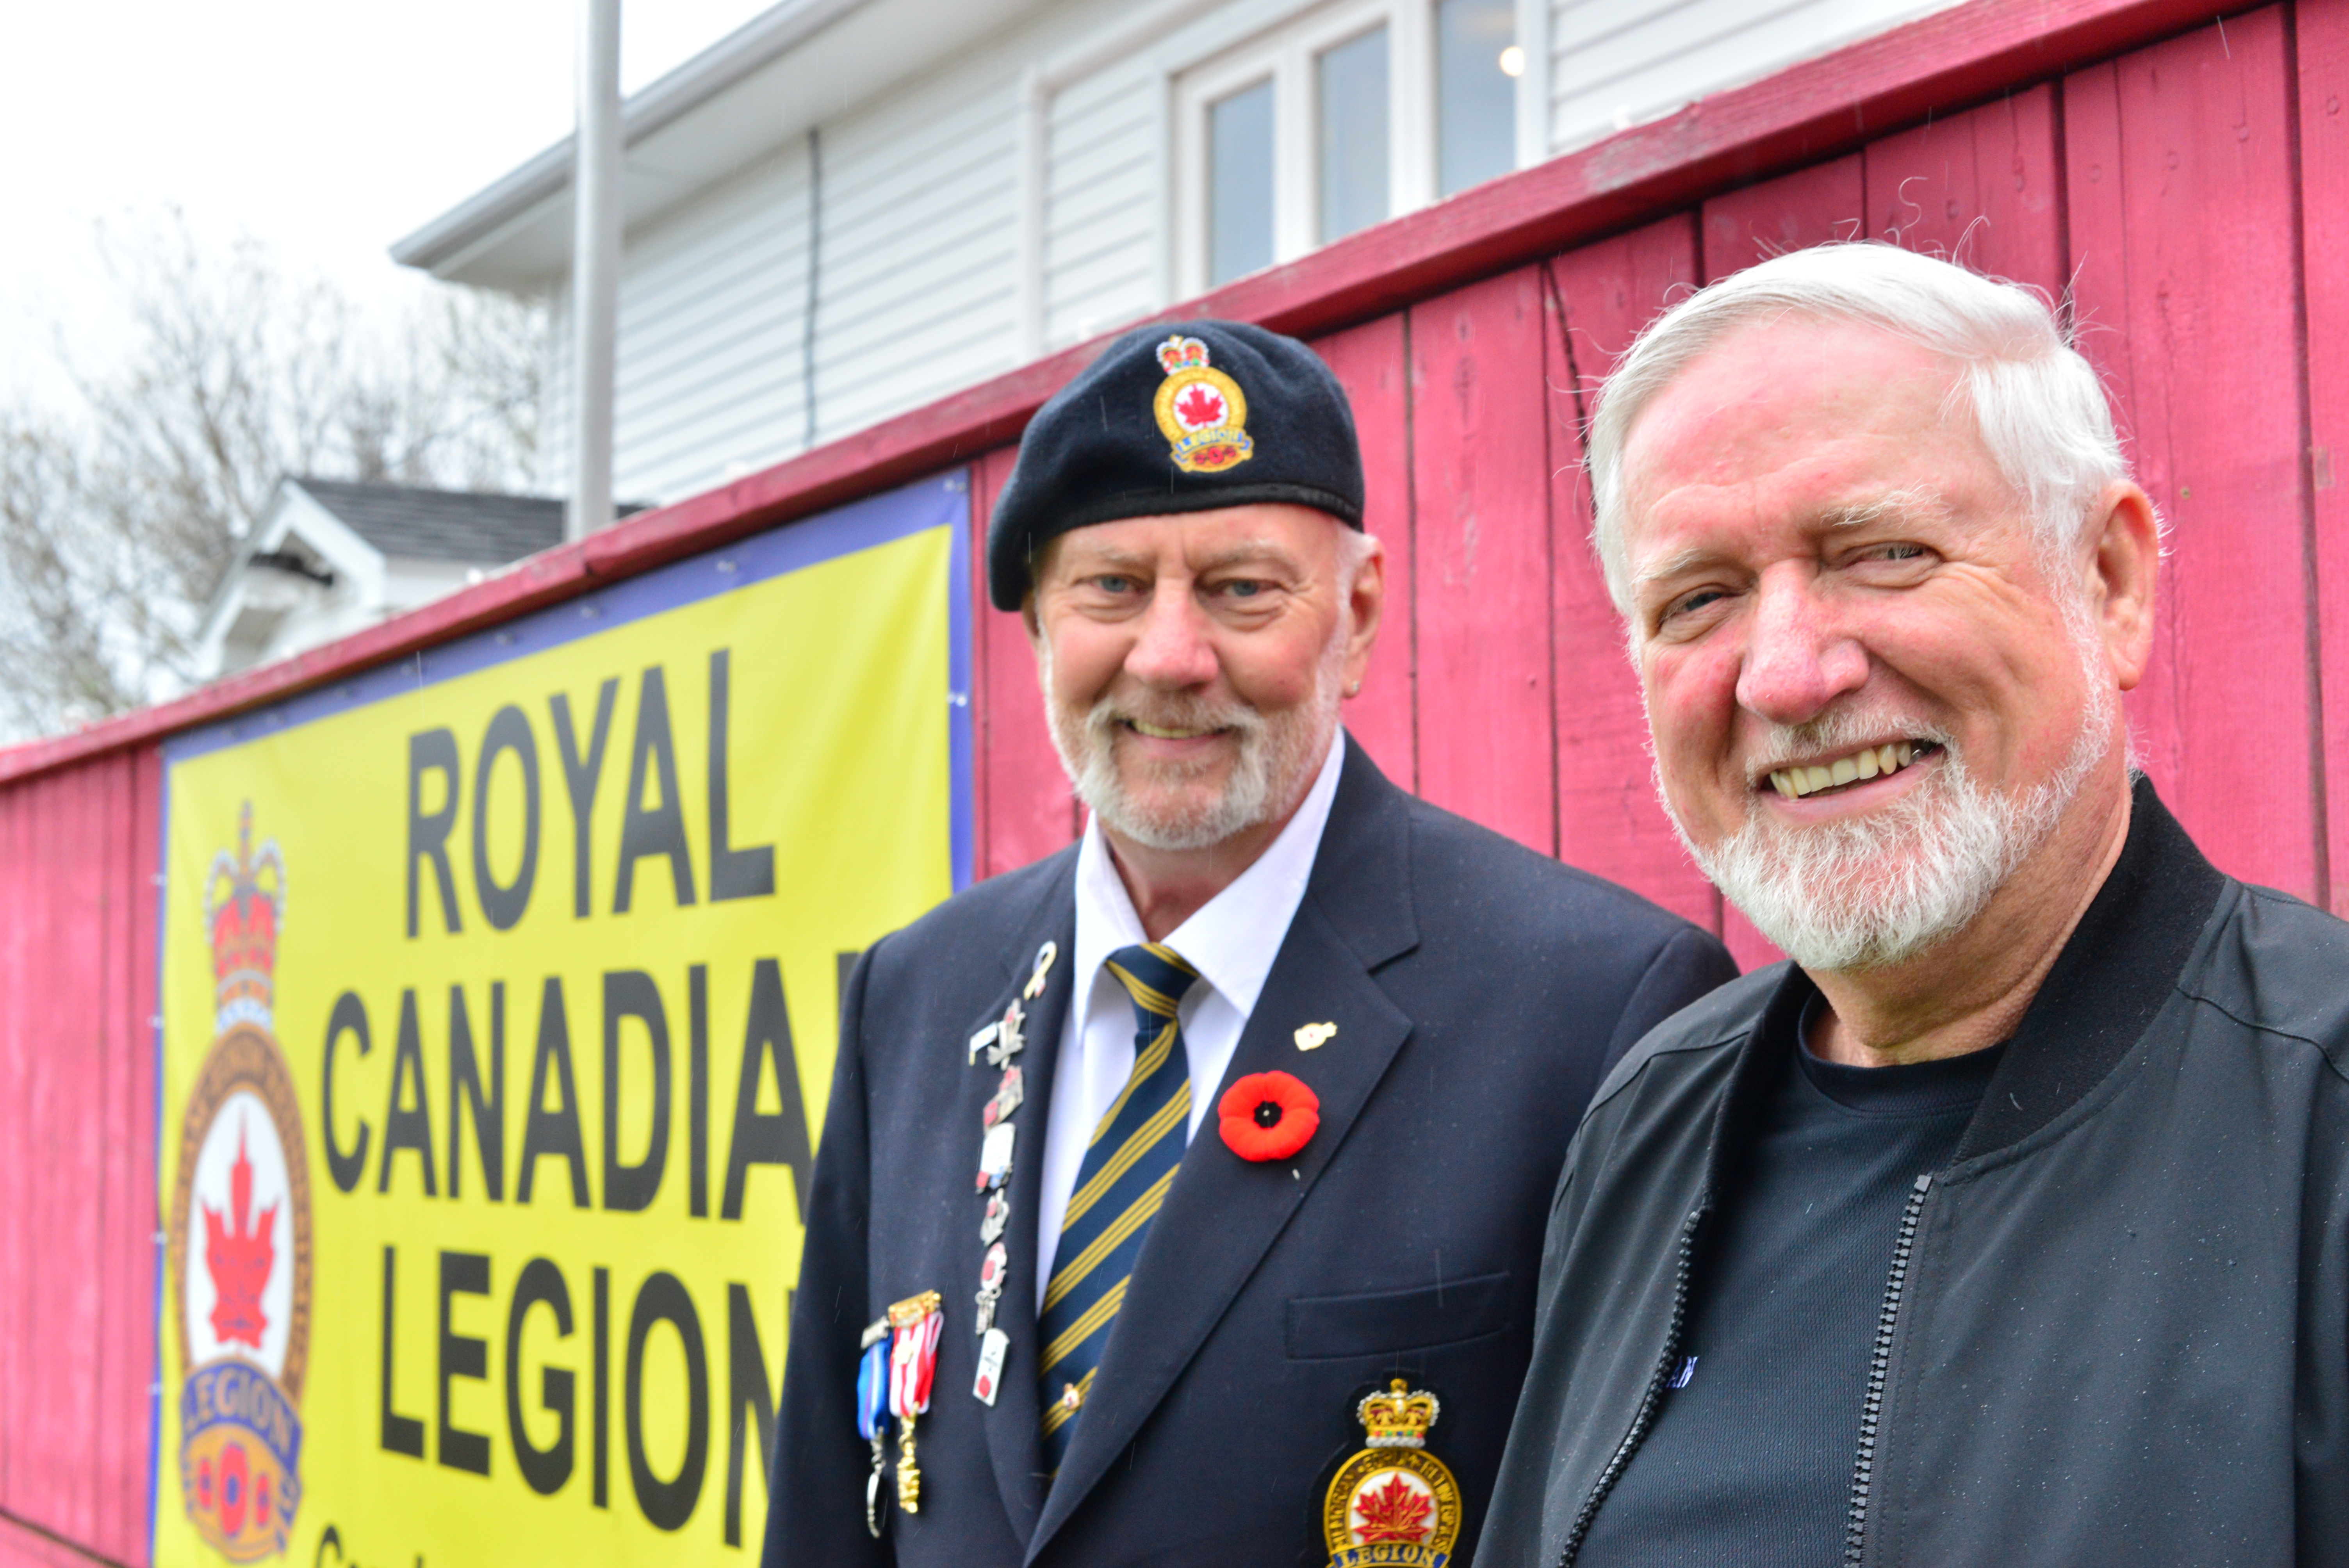 Two volunteers for Mulgrave Monte Carlo event smile in front of Royal Canadian Legion sign